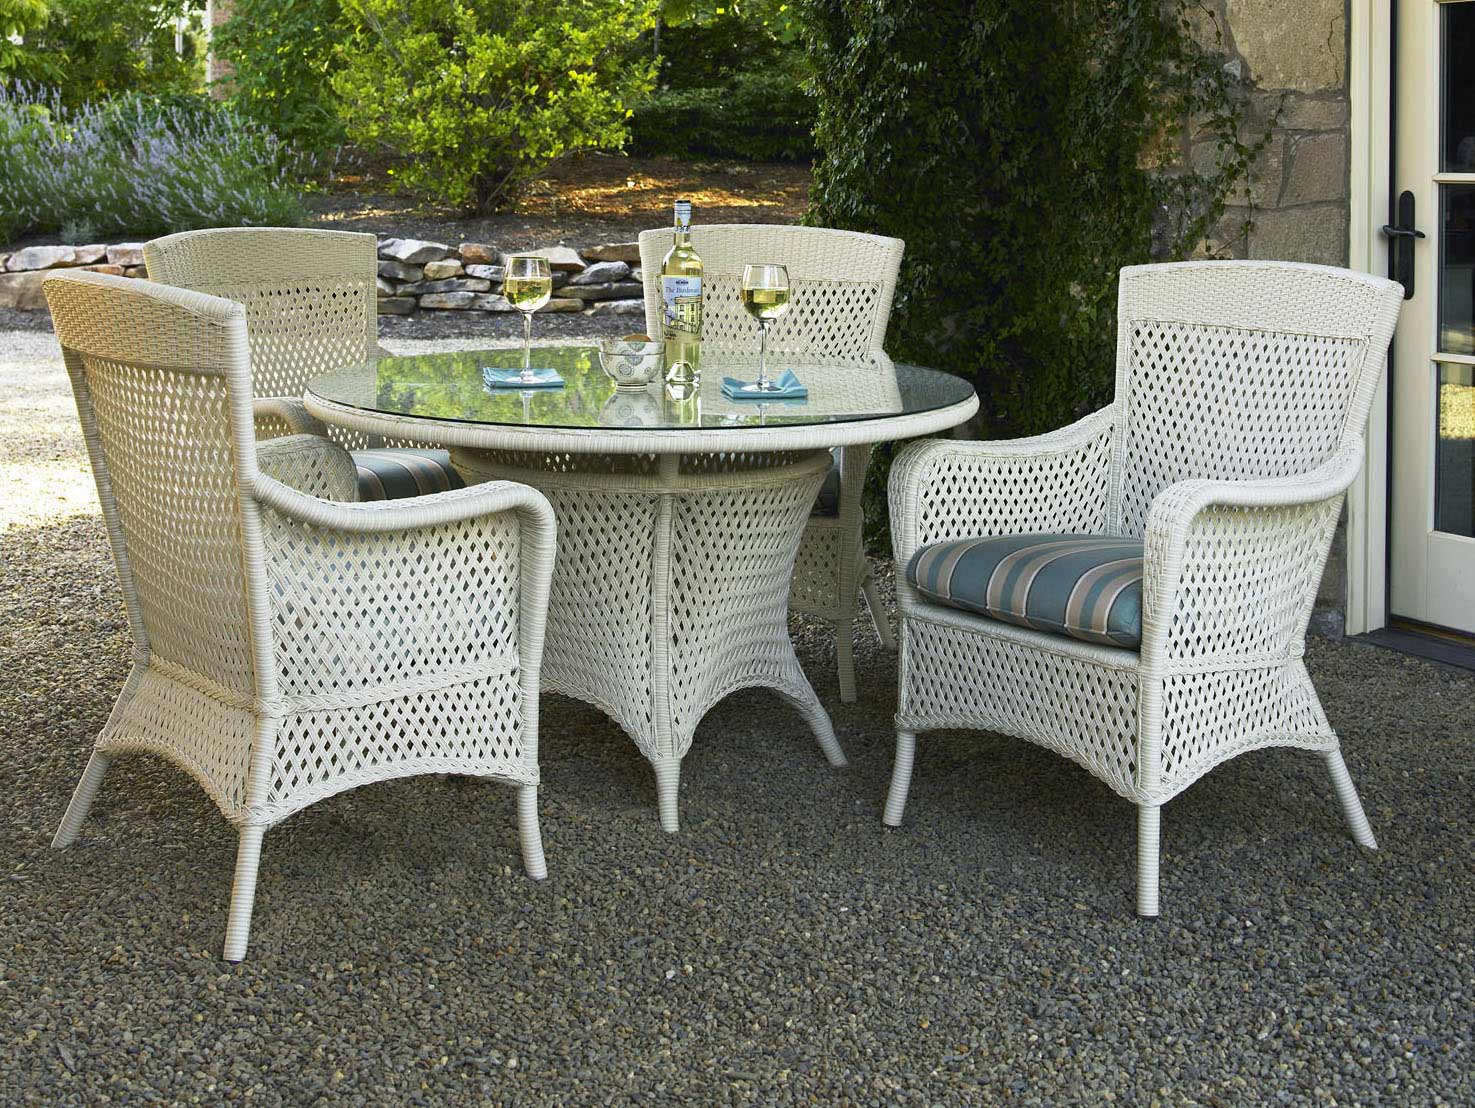 Lloyd/Flanders Grand Traverse Wicker Outdoor Round Table Dining Set